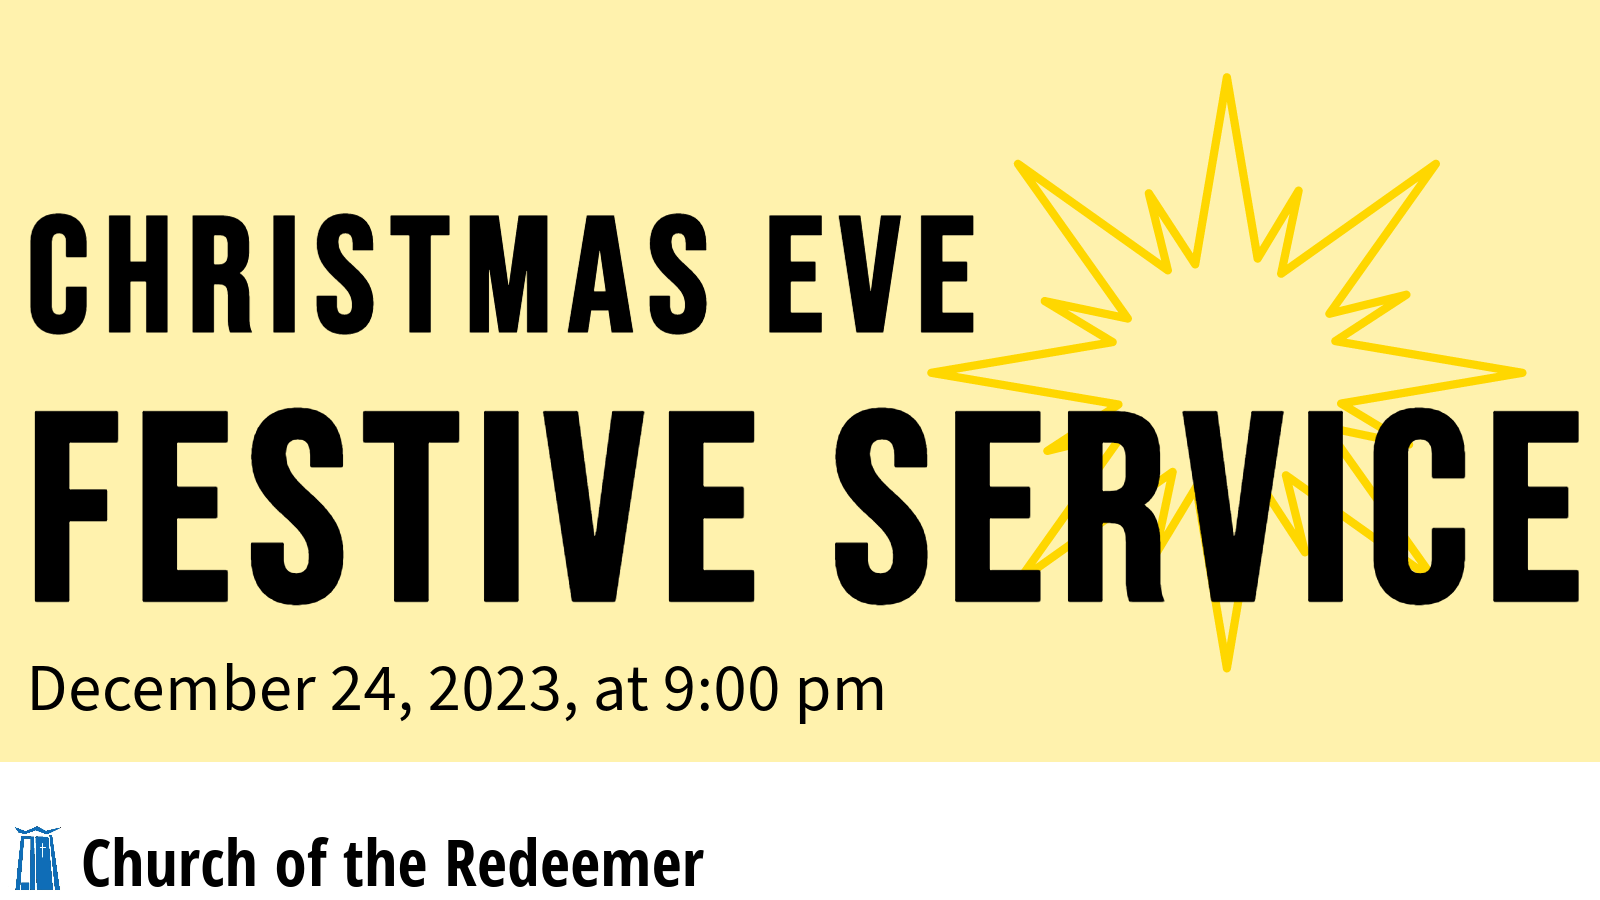 Christmas Eve Festive Service at 9:00 pm at Church of the Redeemer on December 24, 2023.